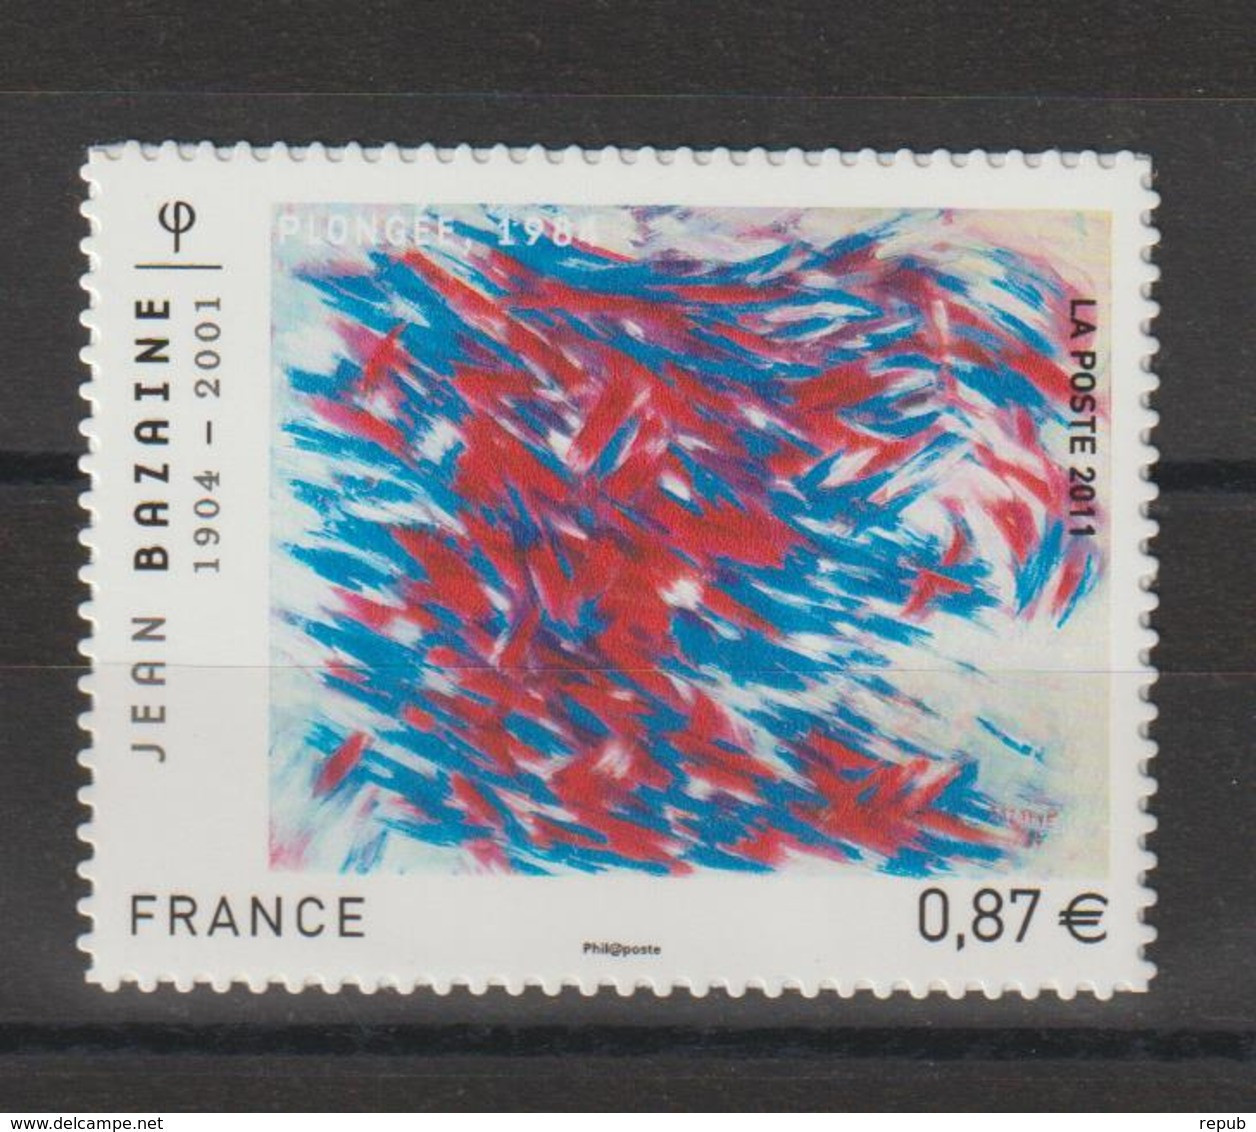 France 2011 Tableau Bazaine 550 Neuf ** MNH - Unused Stamps